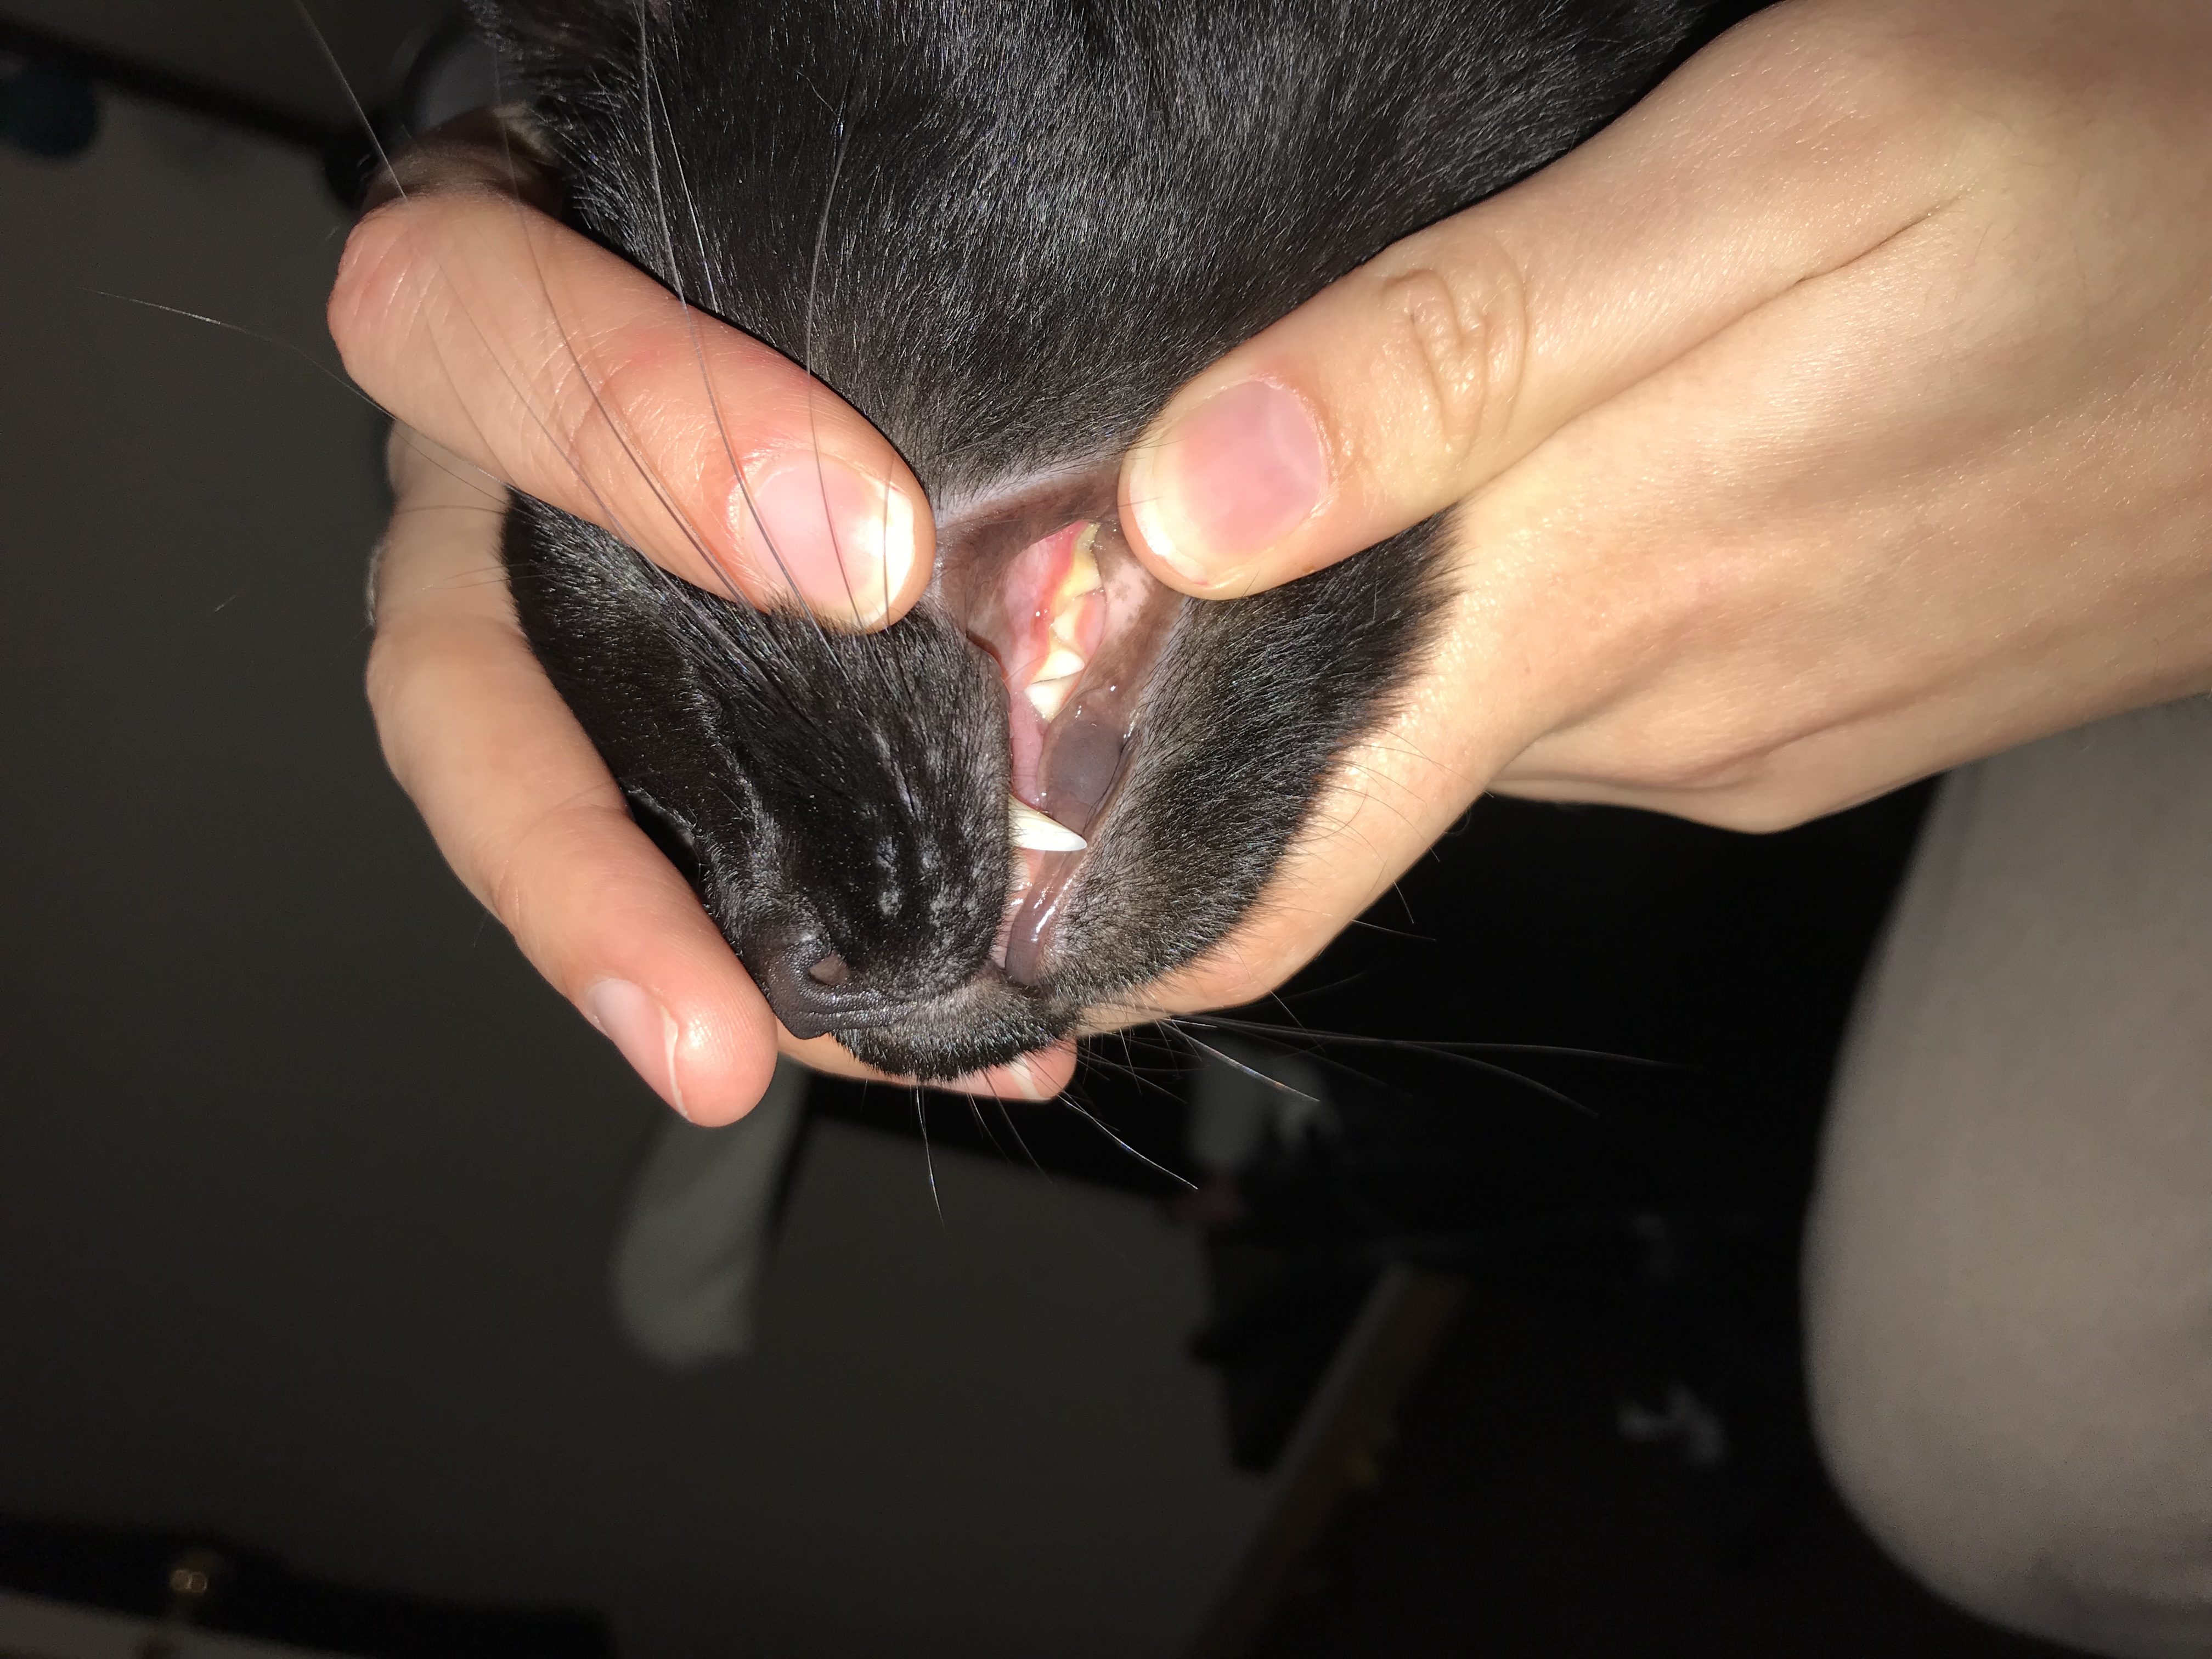 What is the normal color of a cat's gums? My cat's gums looks light